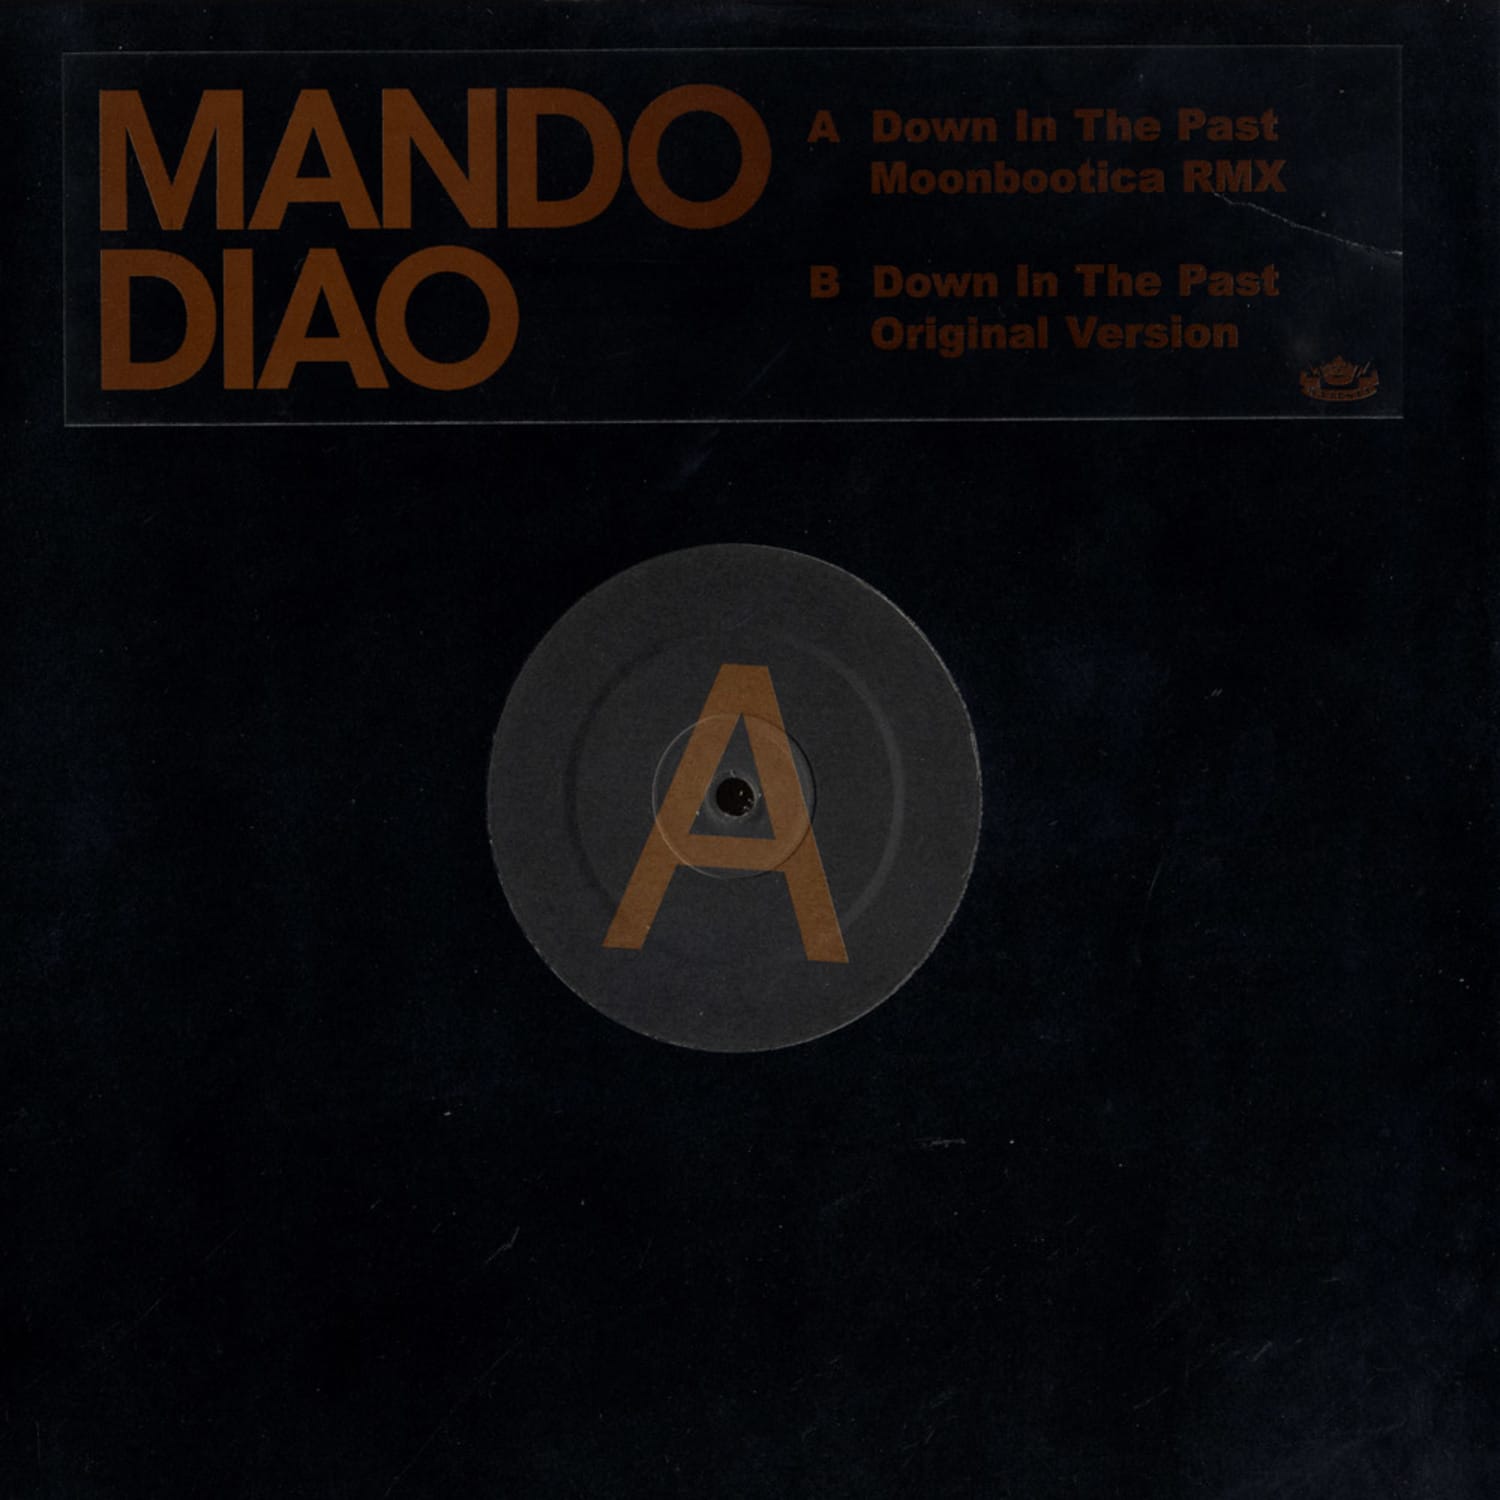 Mando Diao - DOWN IN THE PAST / MOONBOOTICA RMX